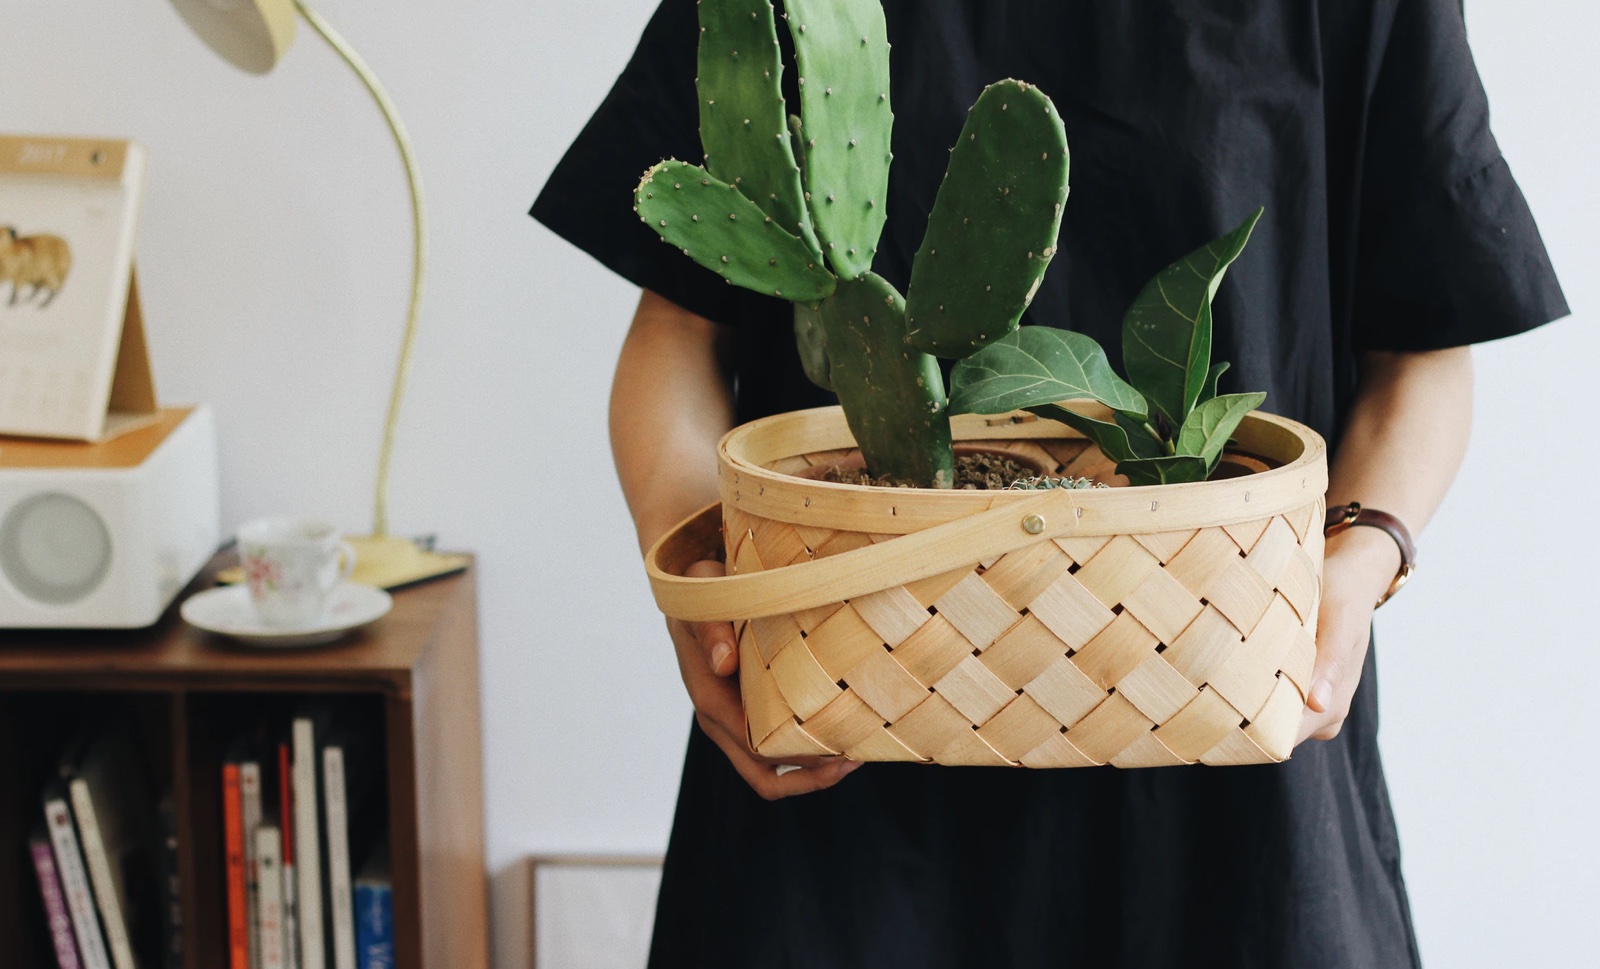 A basket with two plants